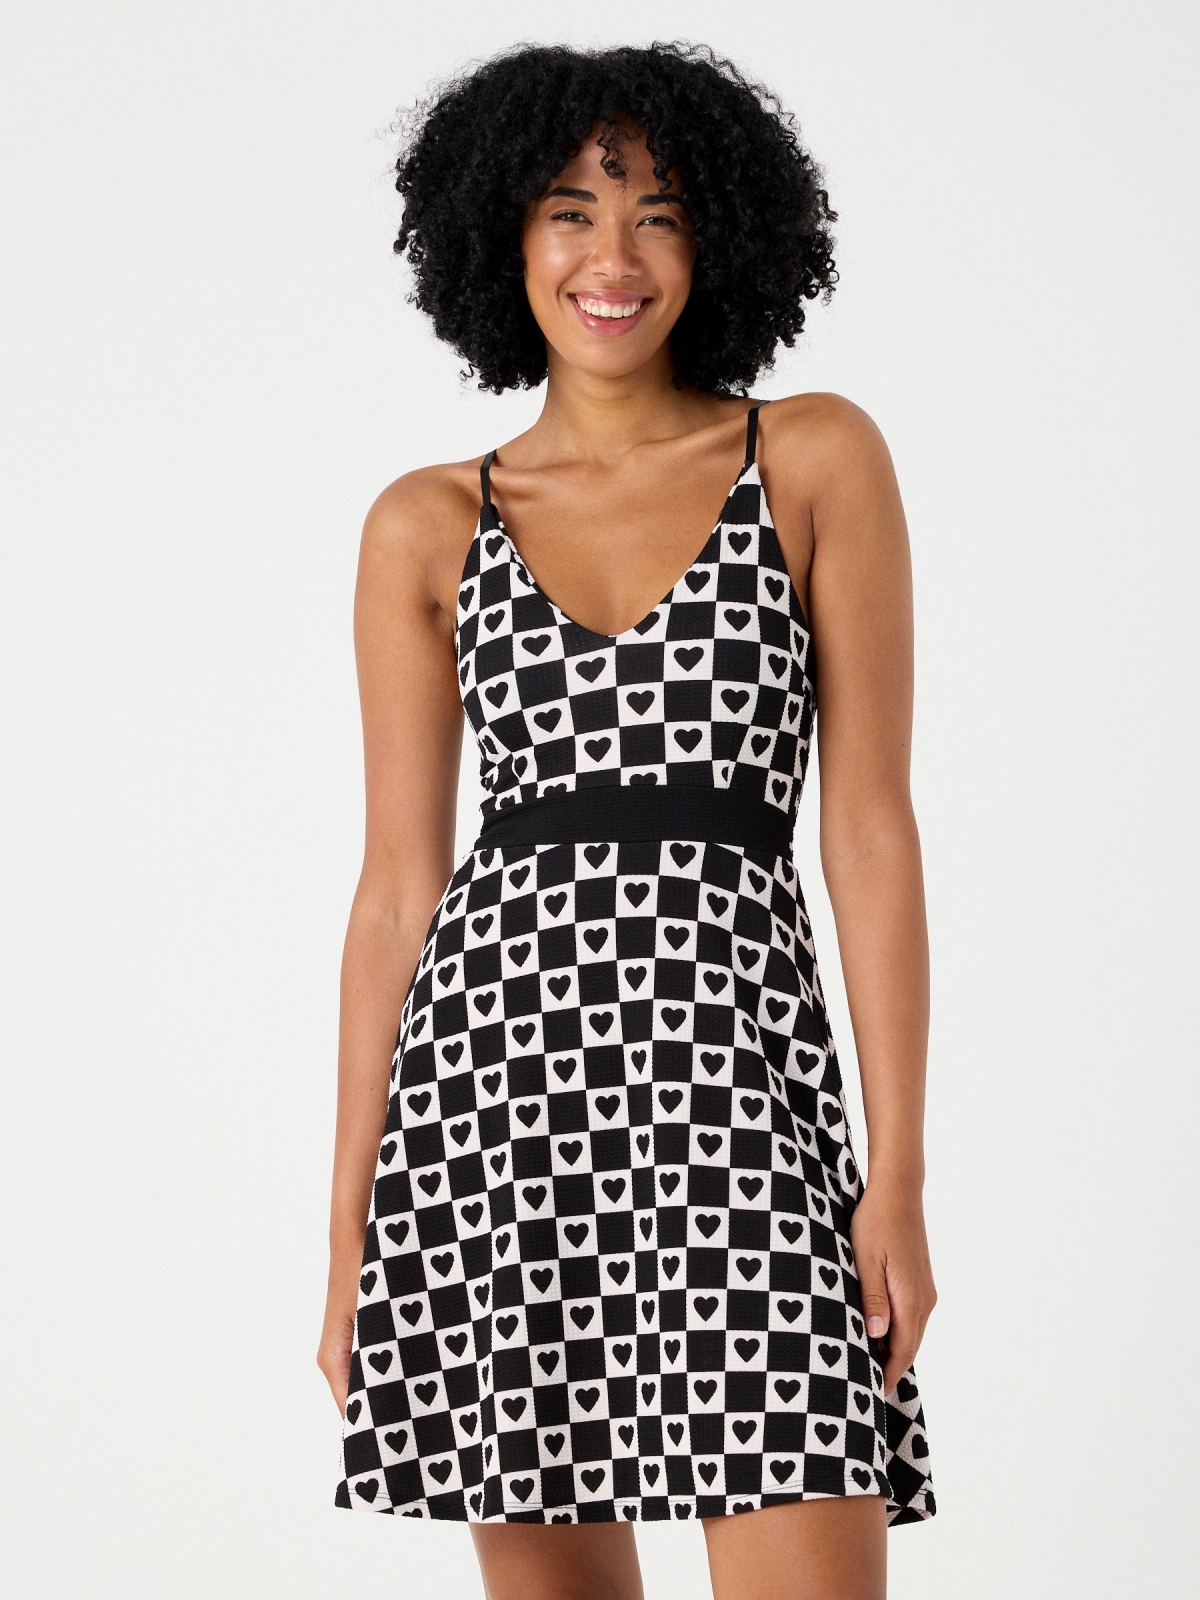 Checkerboard hearts dress black middle front view